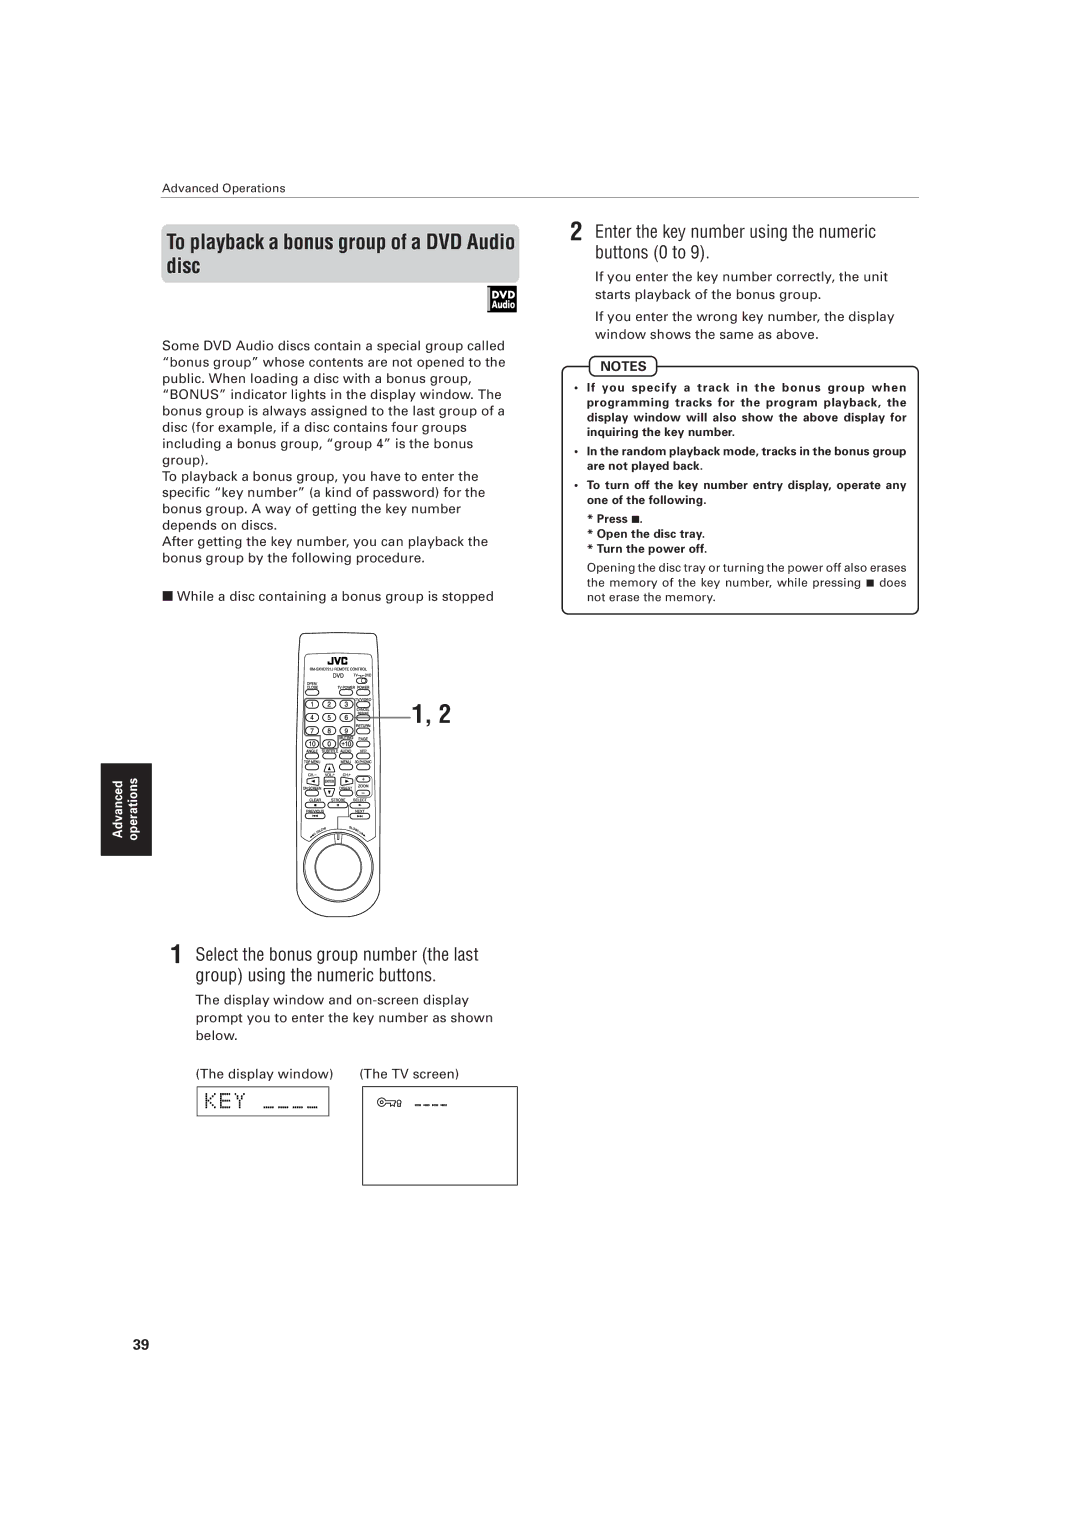 JVC XV-D721BK manual To playback a bonus group of a DVD Audio disc, Enter the key number using the numeric buttons 0 to 